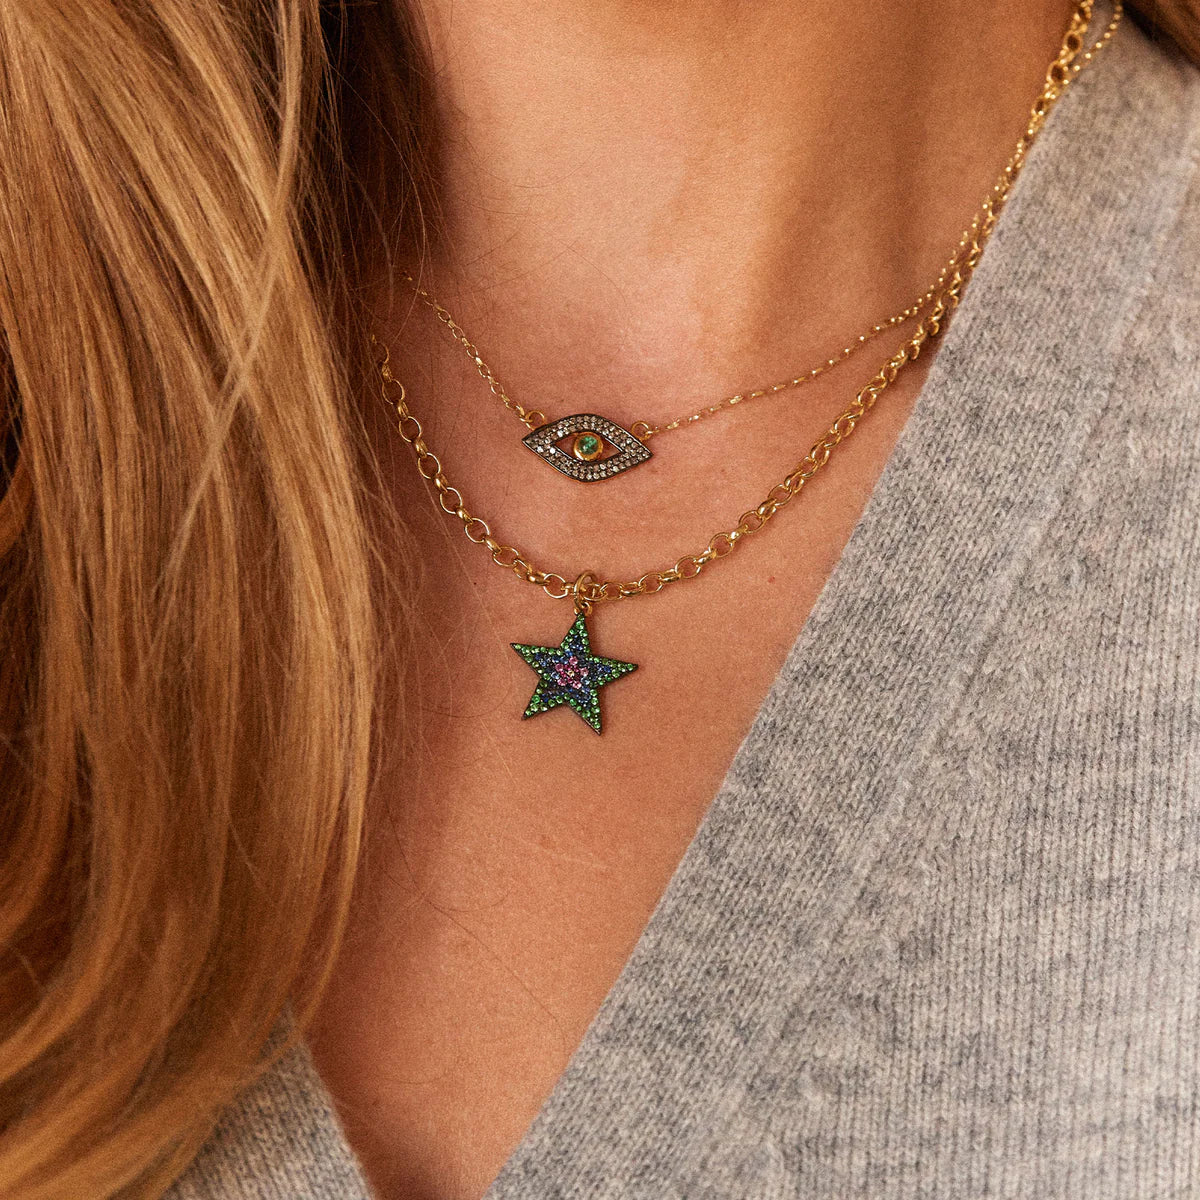 Gold chain necklace with star pendant featuring pave blue and pink sapphires and Tsavorite diamonds